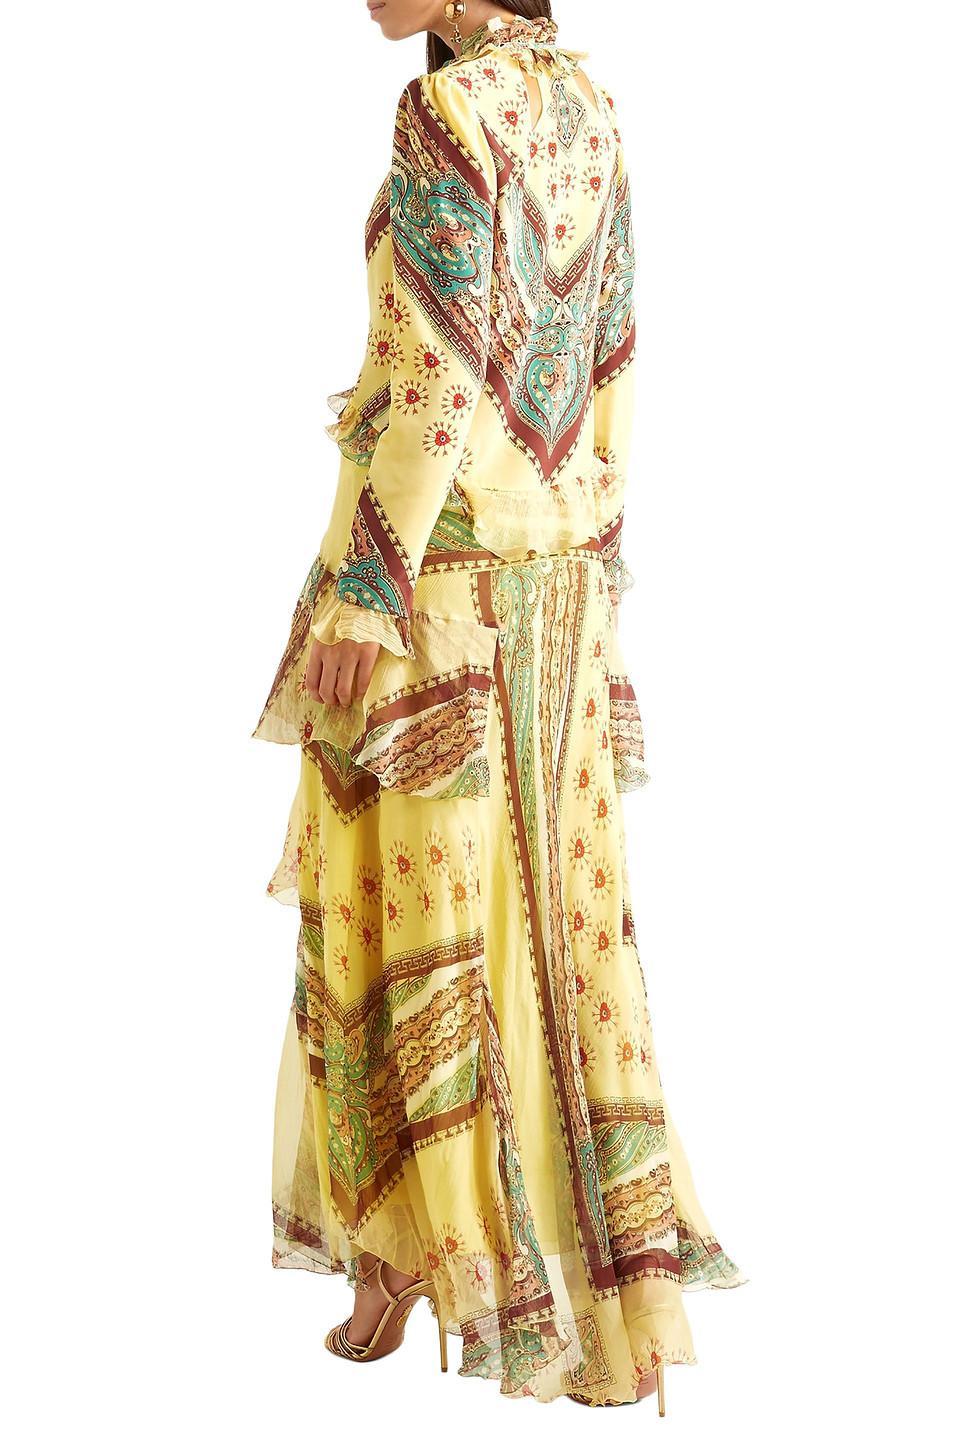 etro embroidered tiered dress